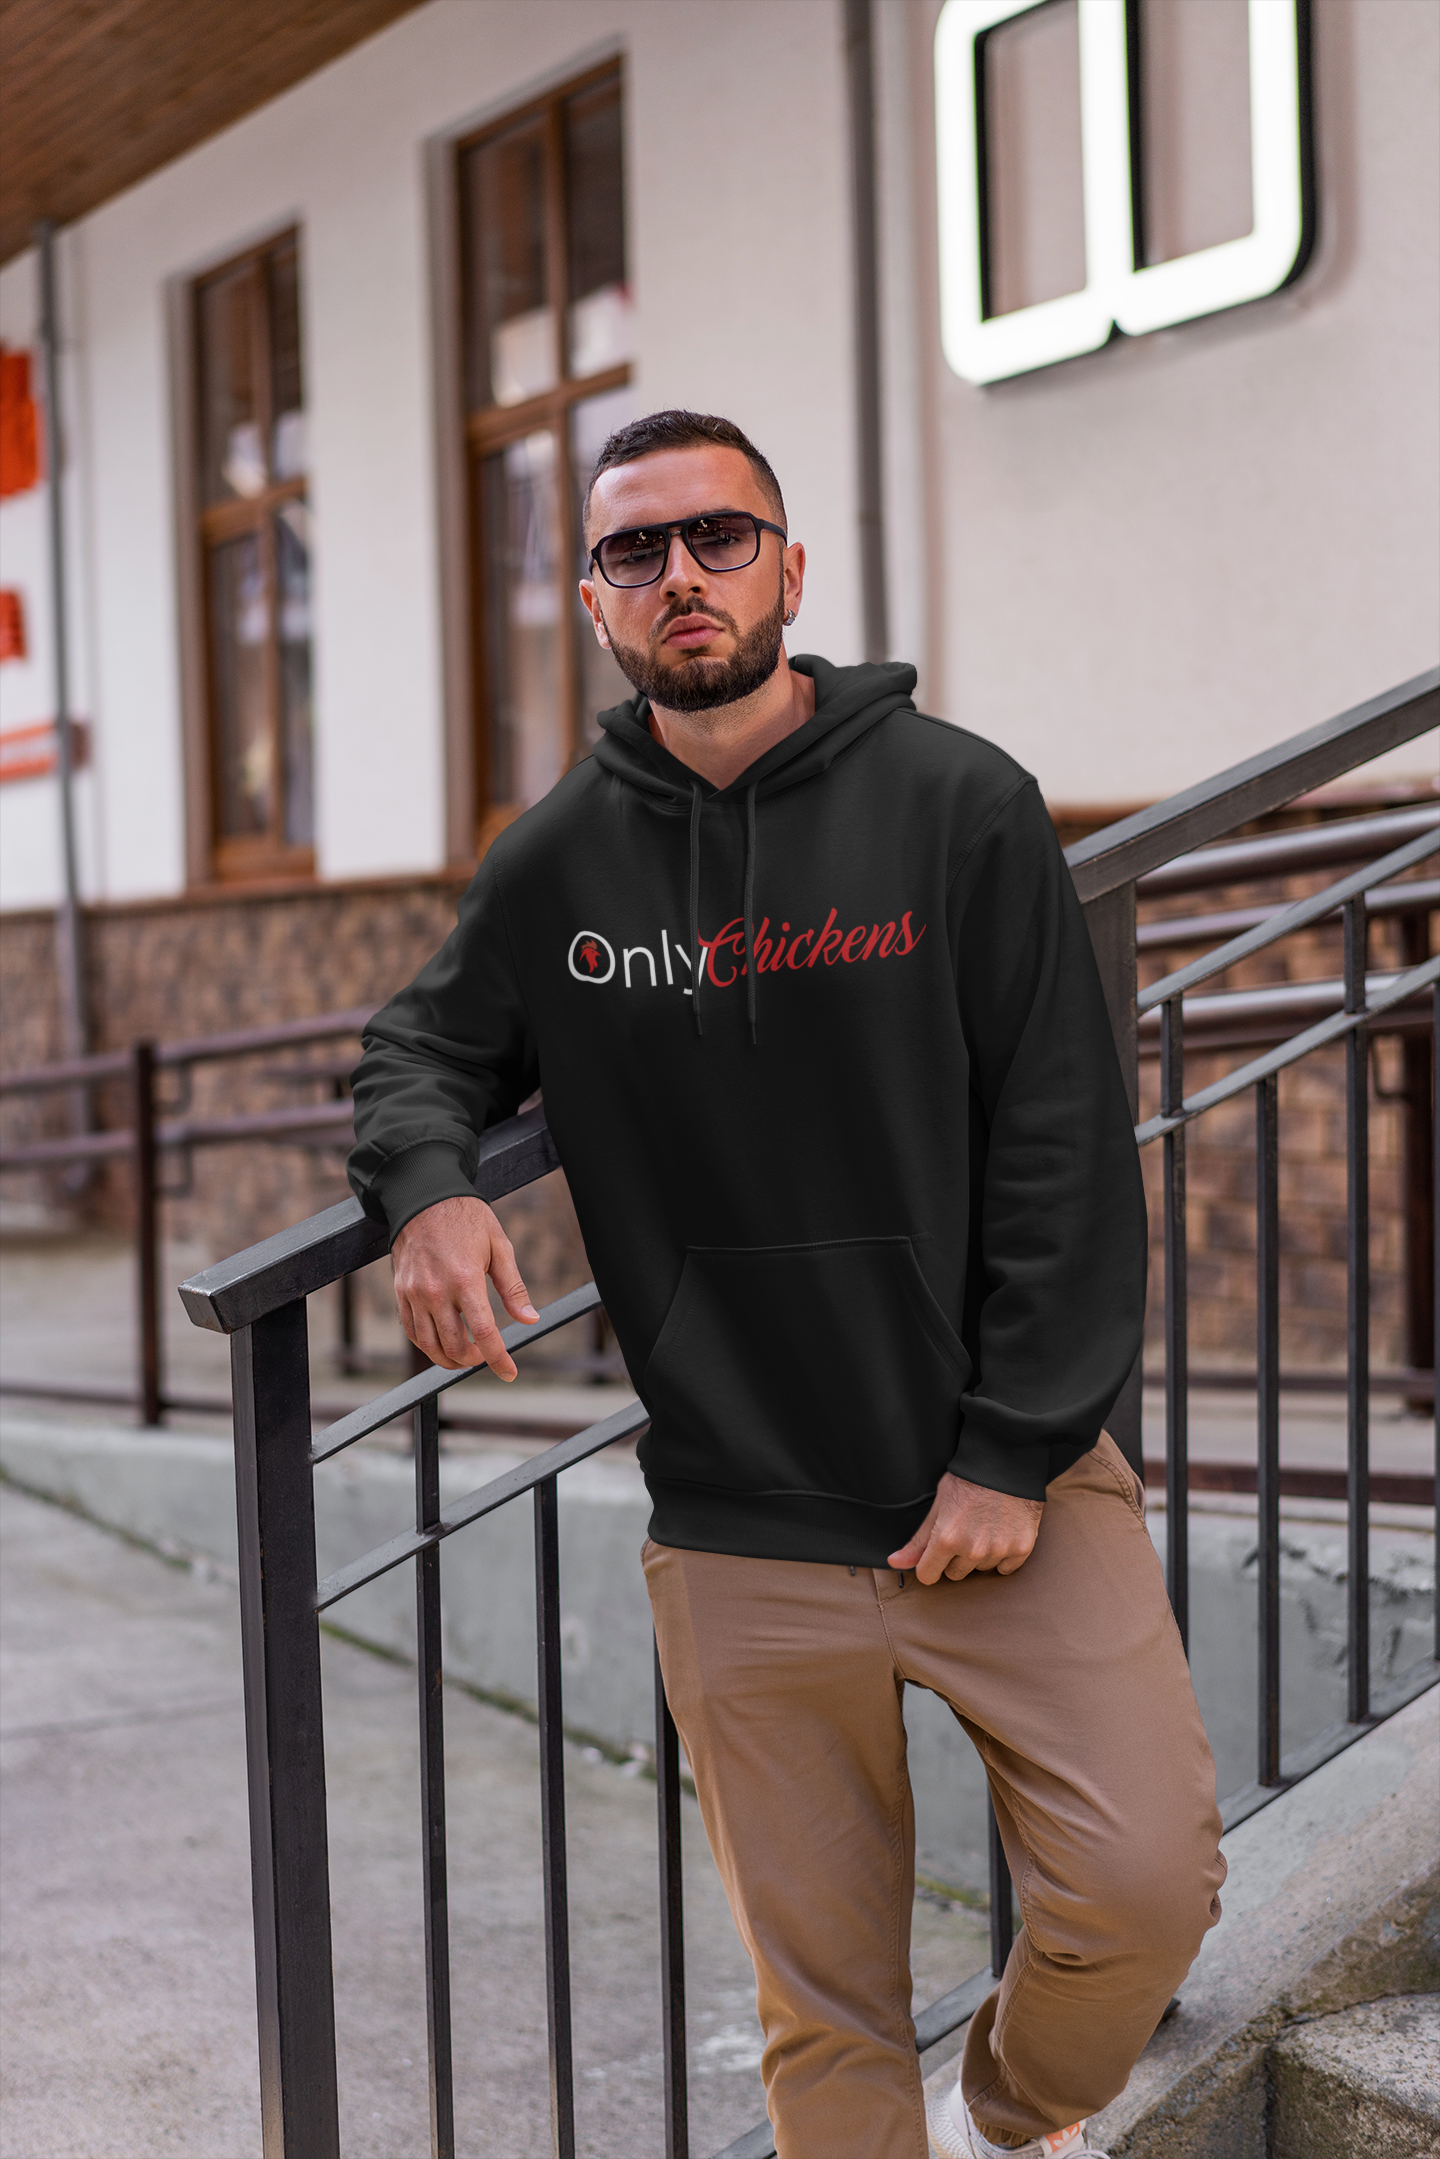 Only Chickens Hoodie